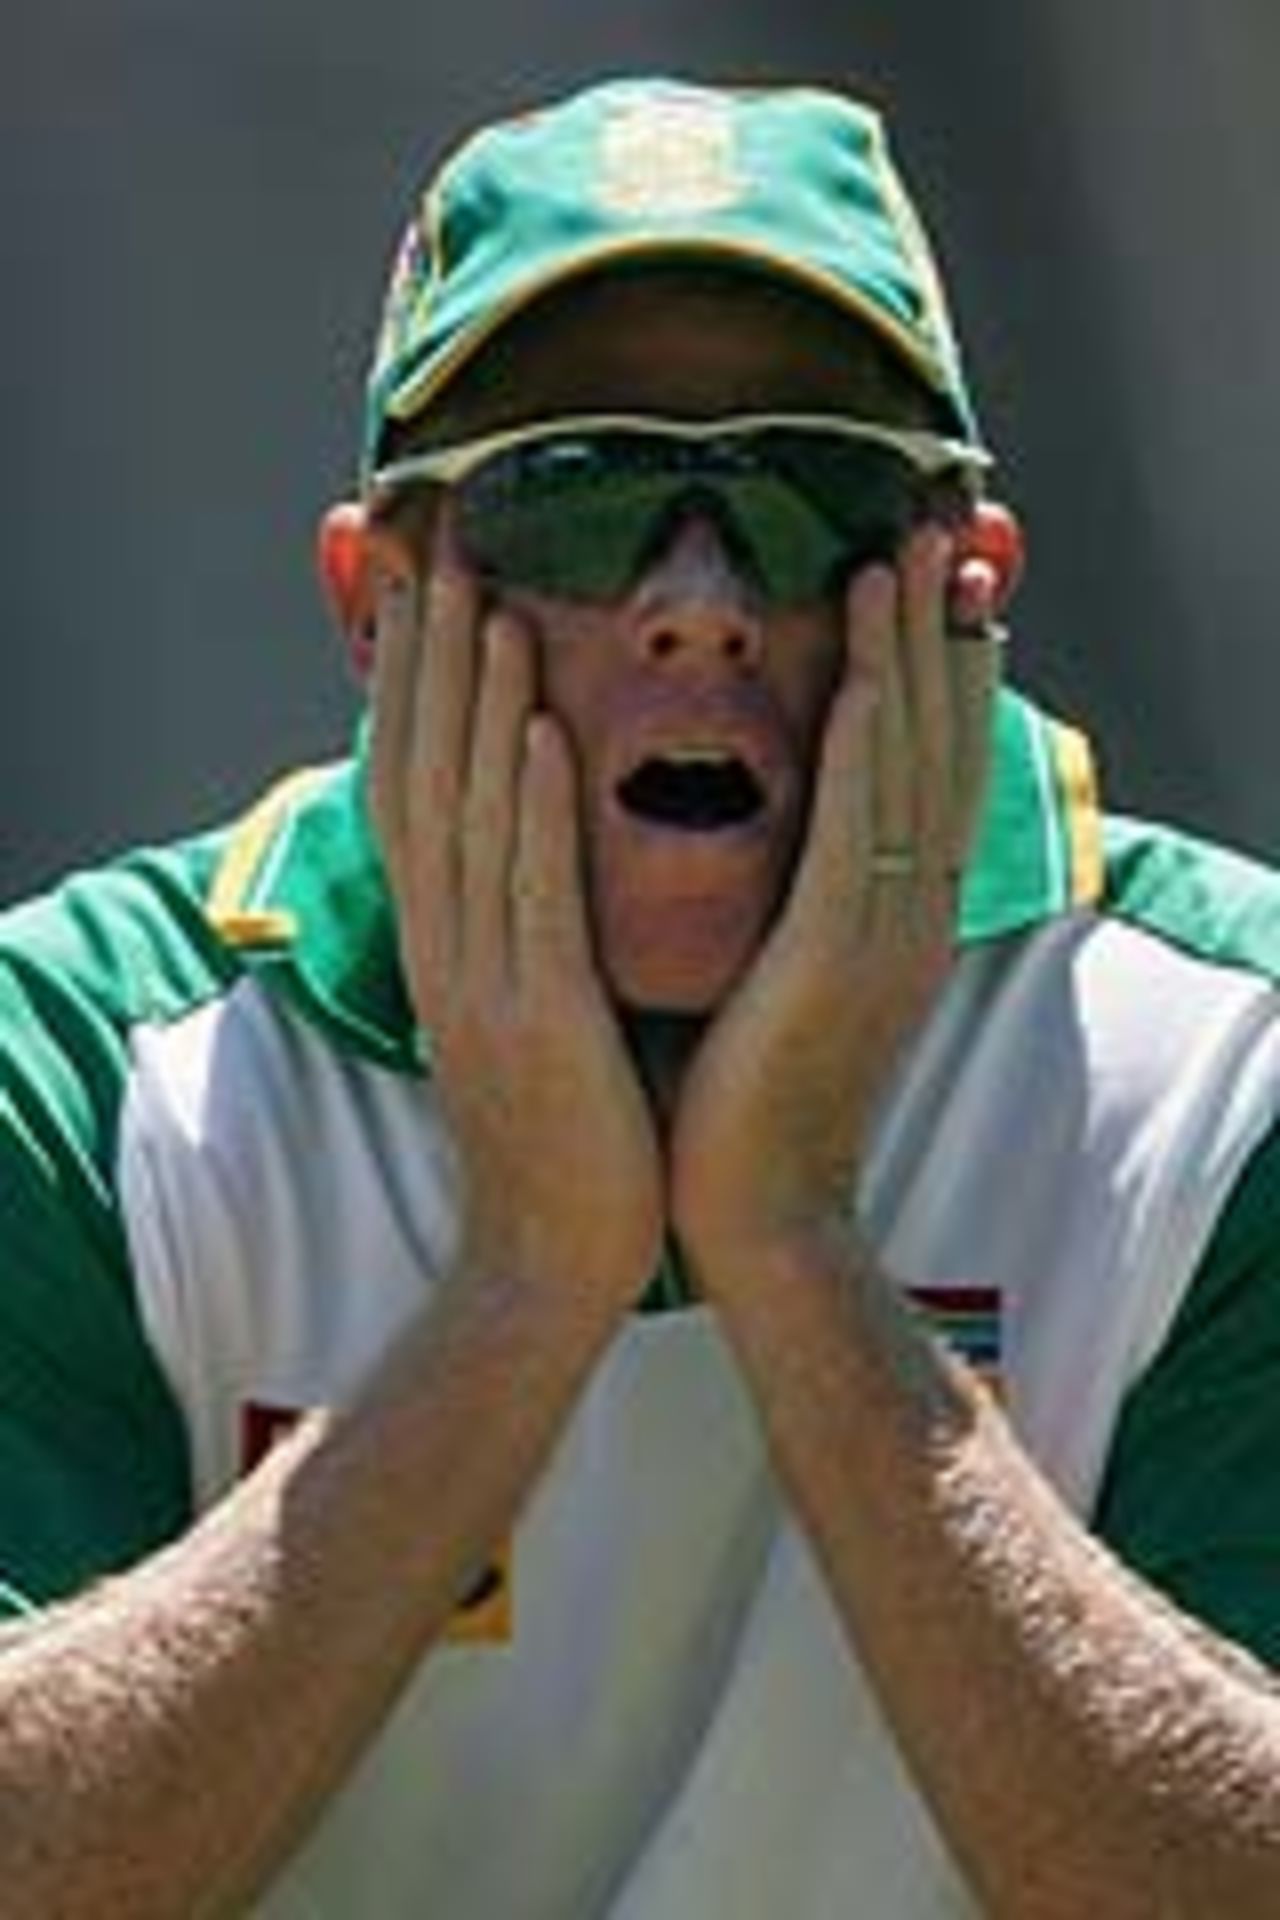 Shaun Pollock of South Africa looks on during training, South Africa v England, 3rd Test, Cape Town